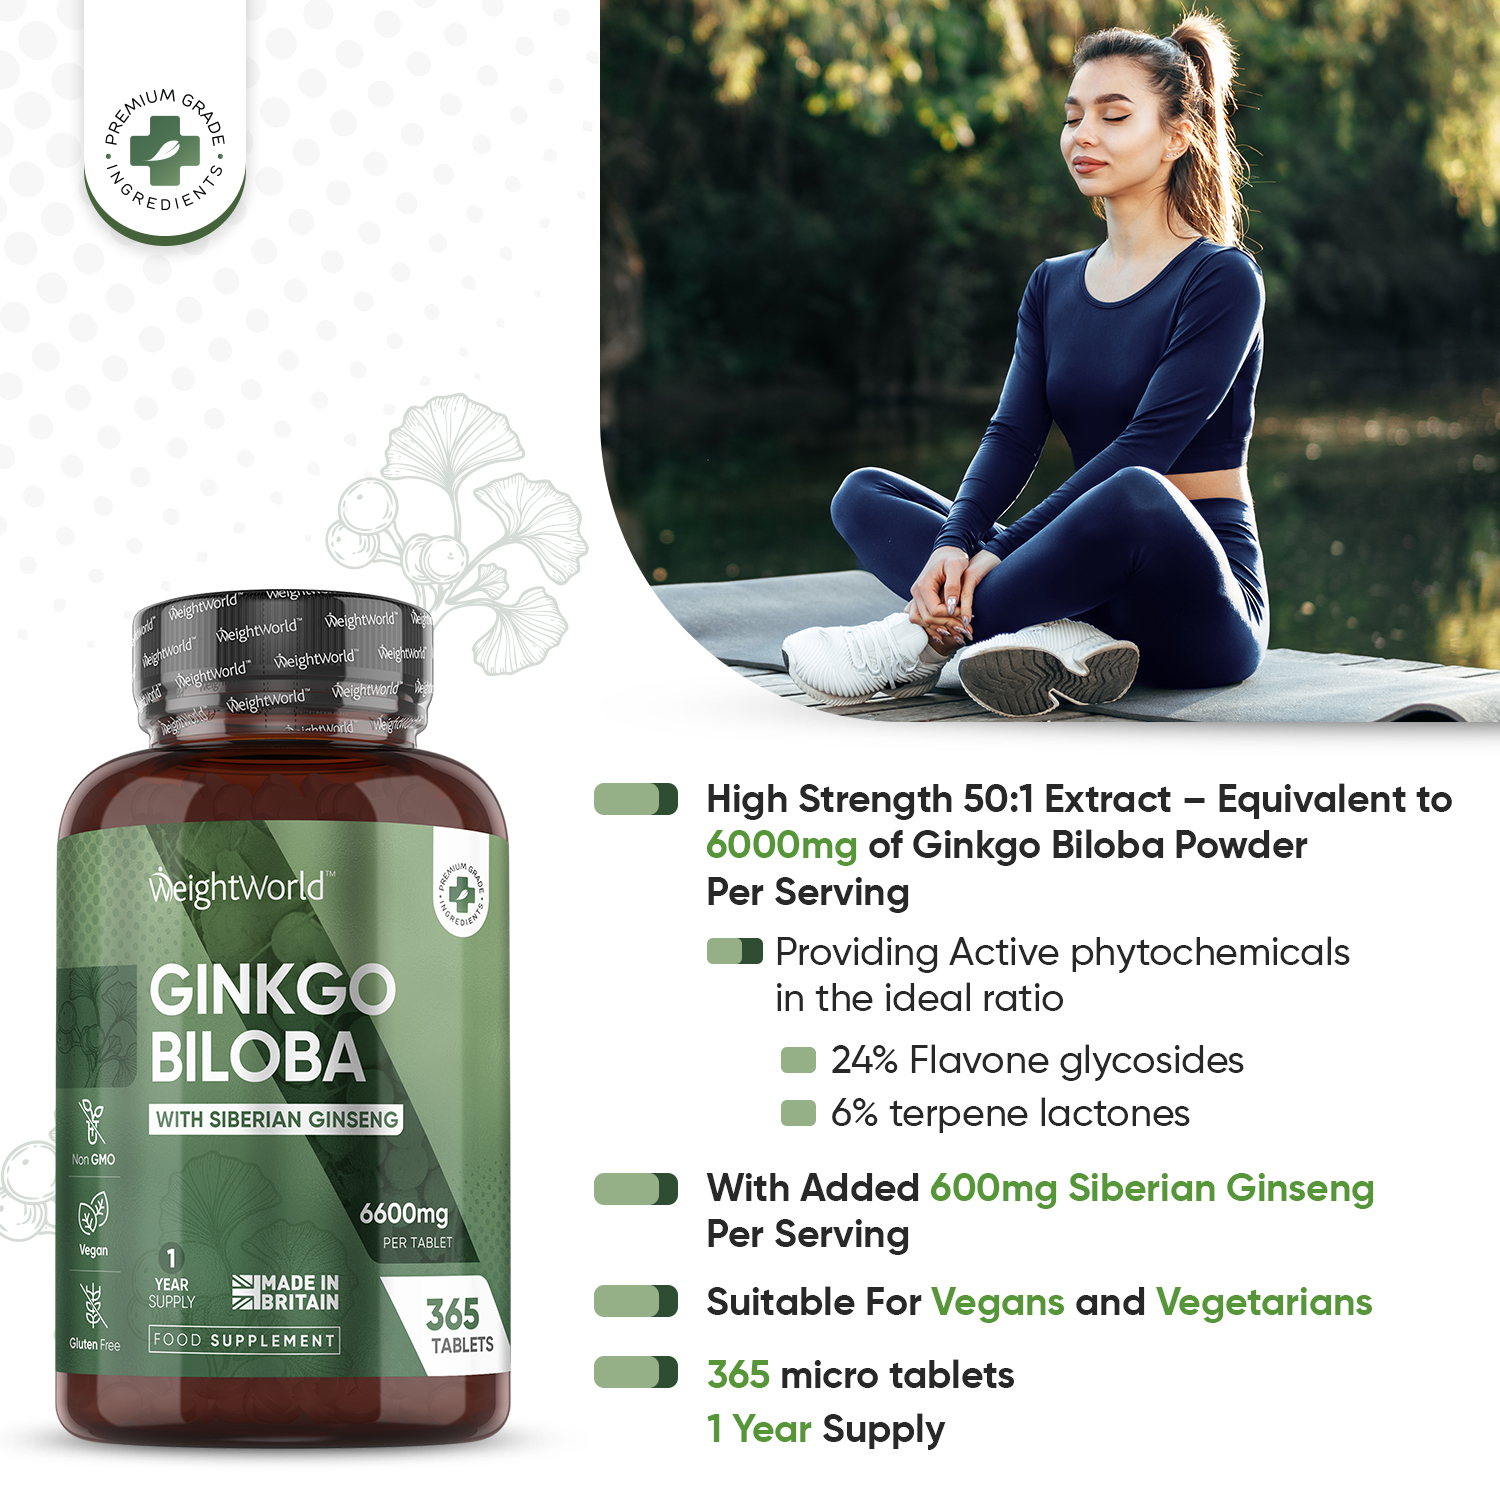 Ginkgo Biloba With Siberian Ginseng from EarthBiotics - Simplified Nutritional Information